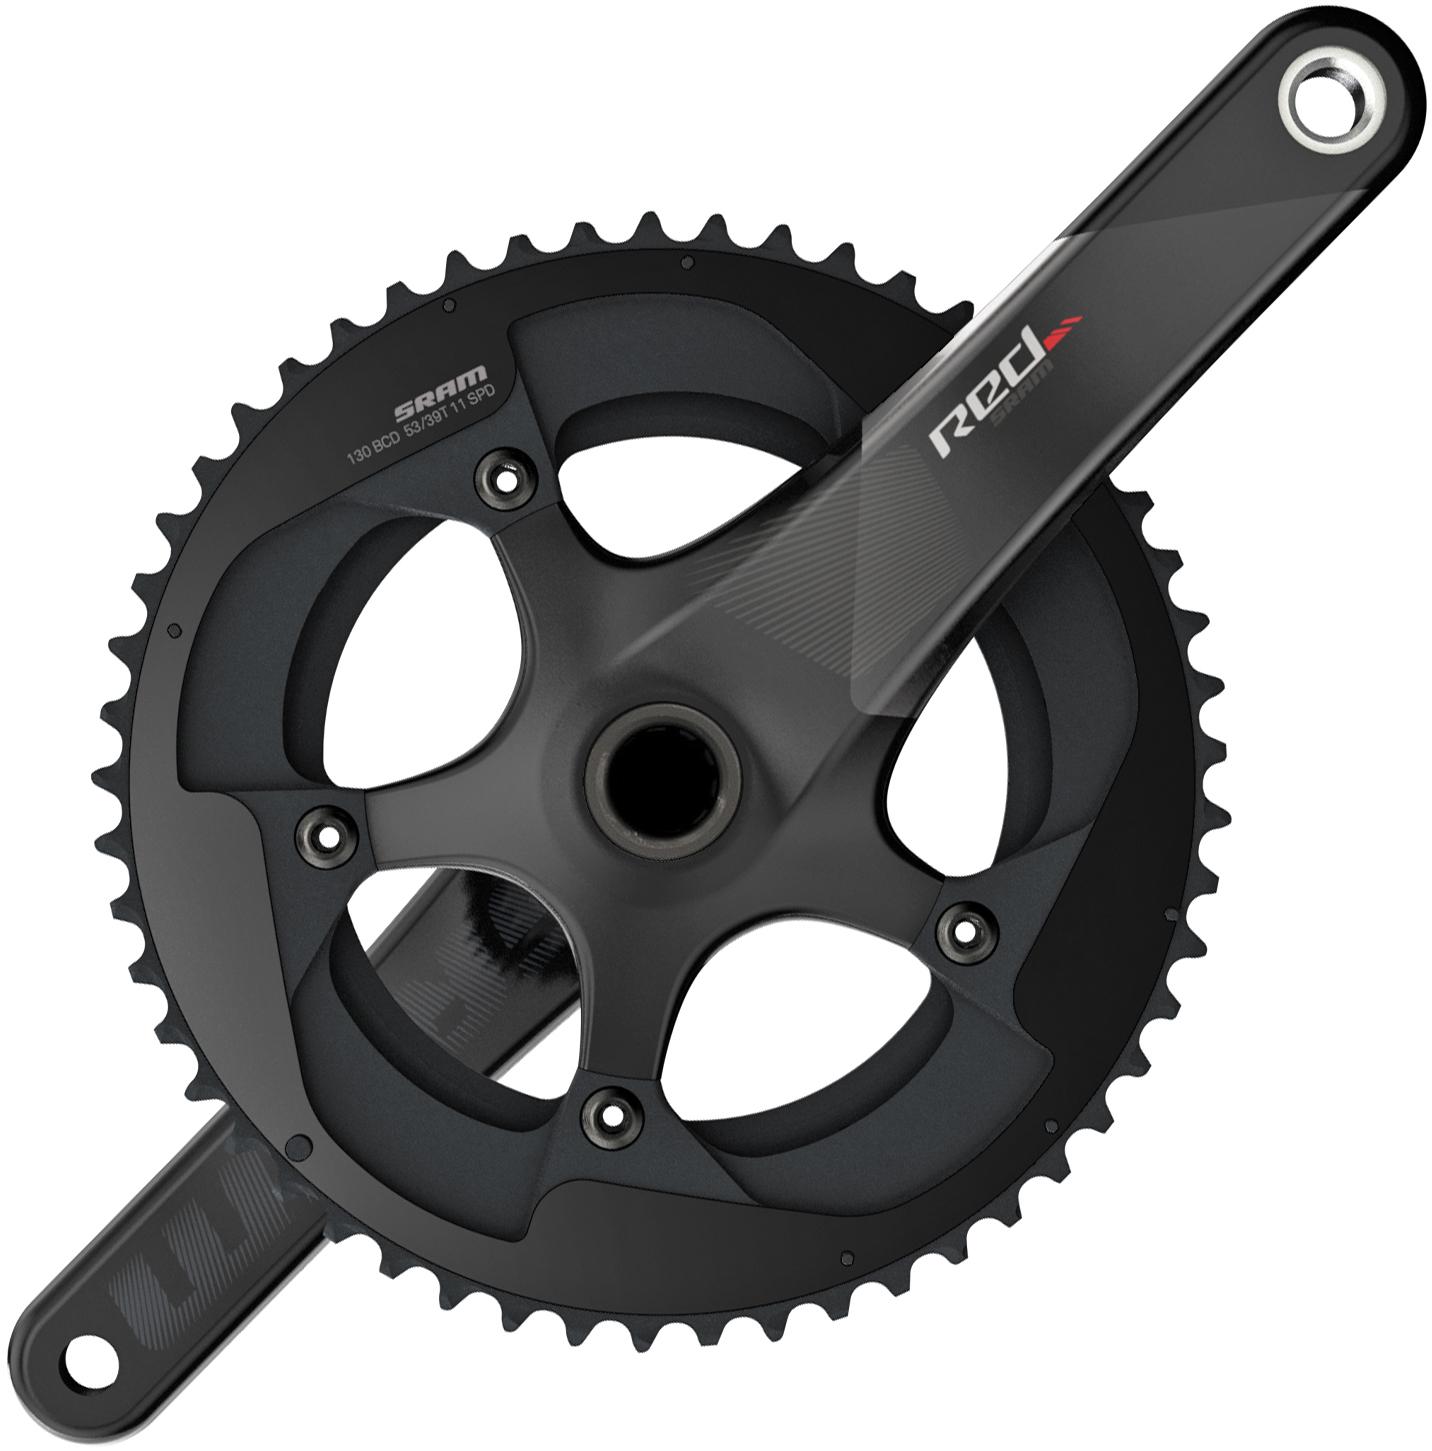 Sram Red 11 Speed Chainset (gxp) - Black